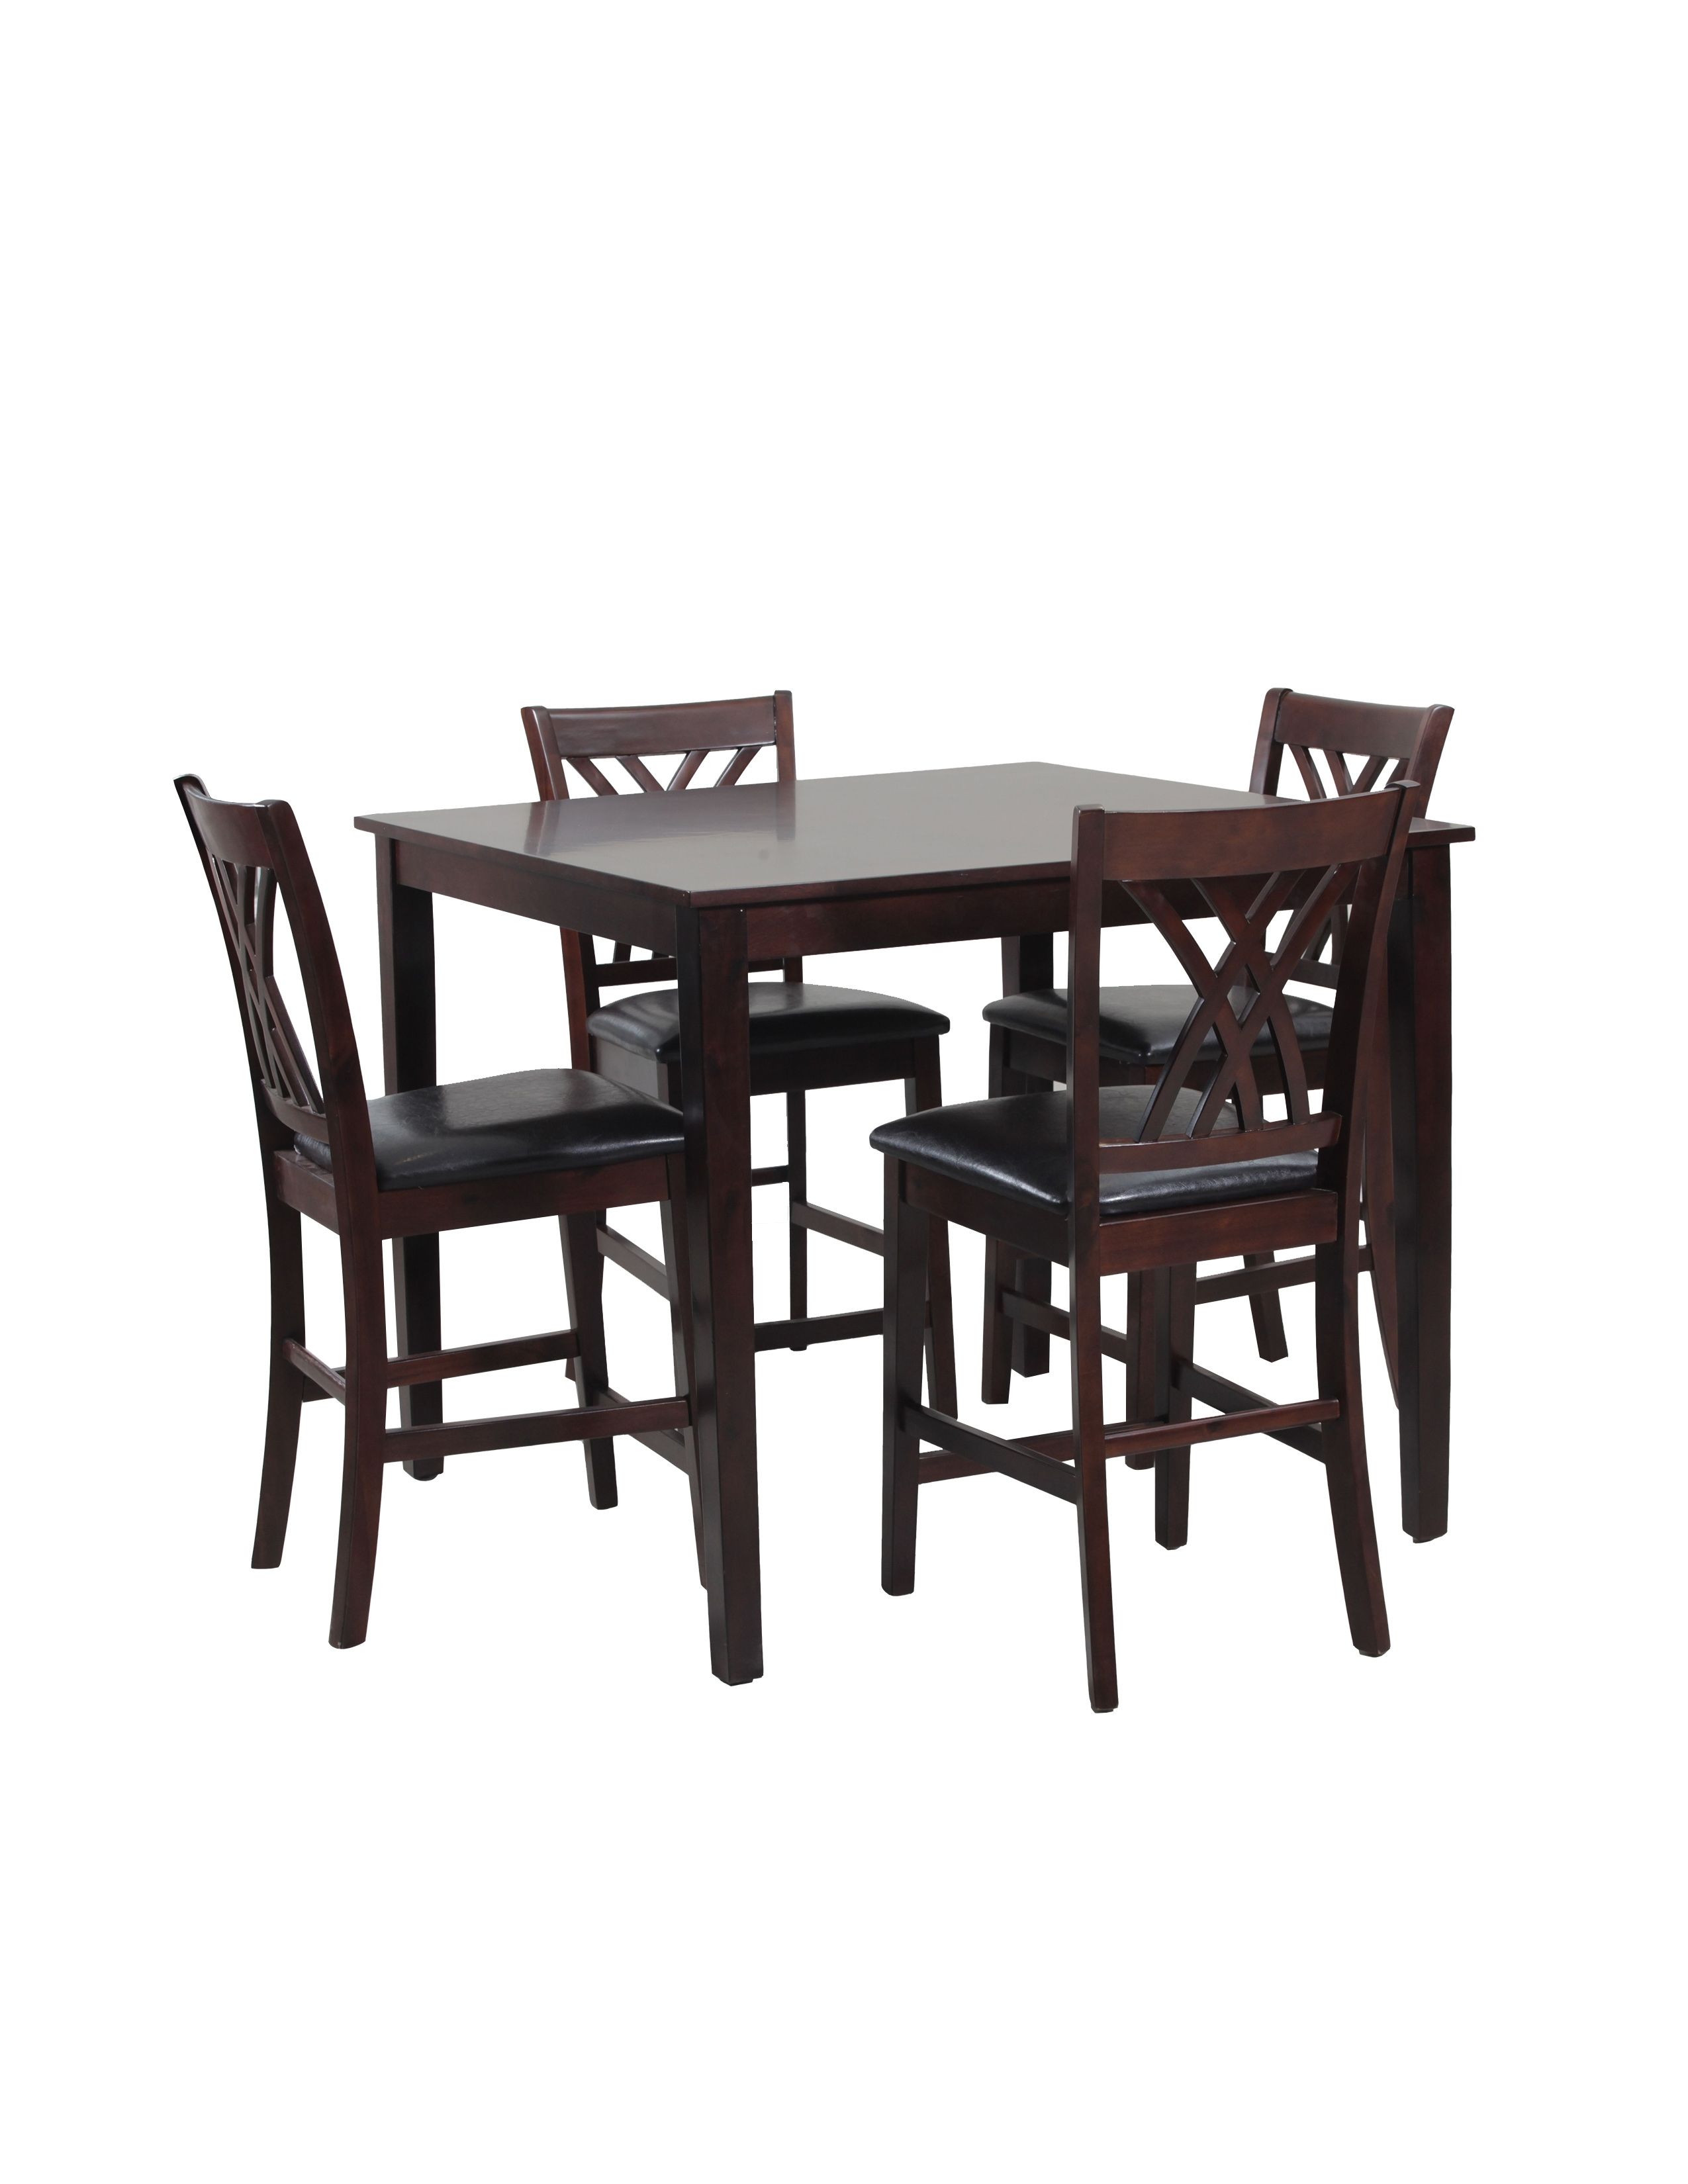 Acme Rolle 5 Piece Counter Height Dining Set, Faux Marble And Inside Current Pierce 5 Piece Counter Sets (View 6 of 20)